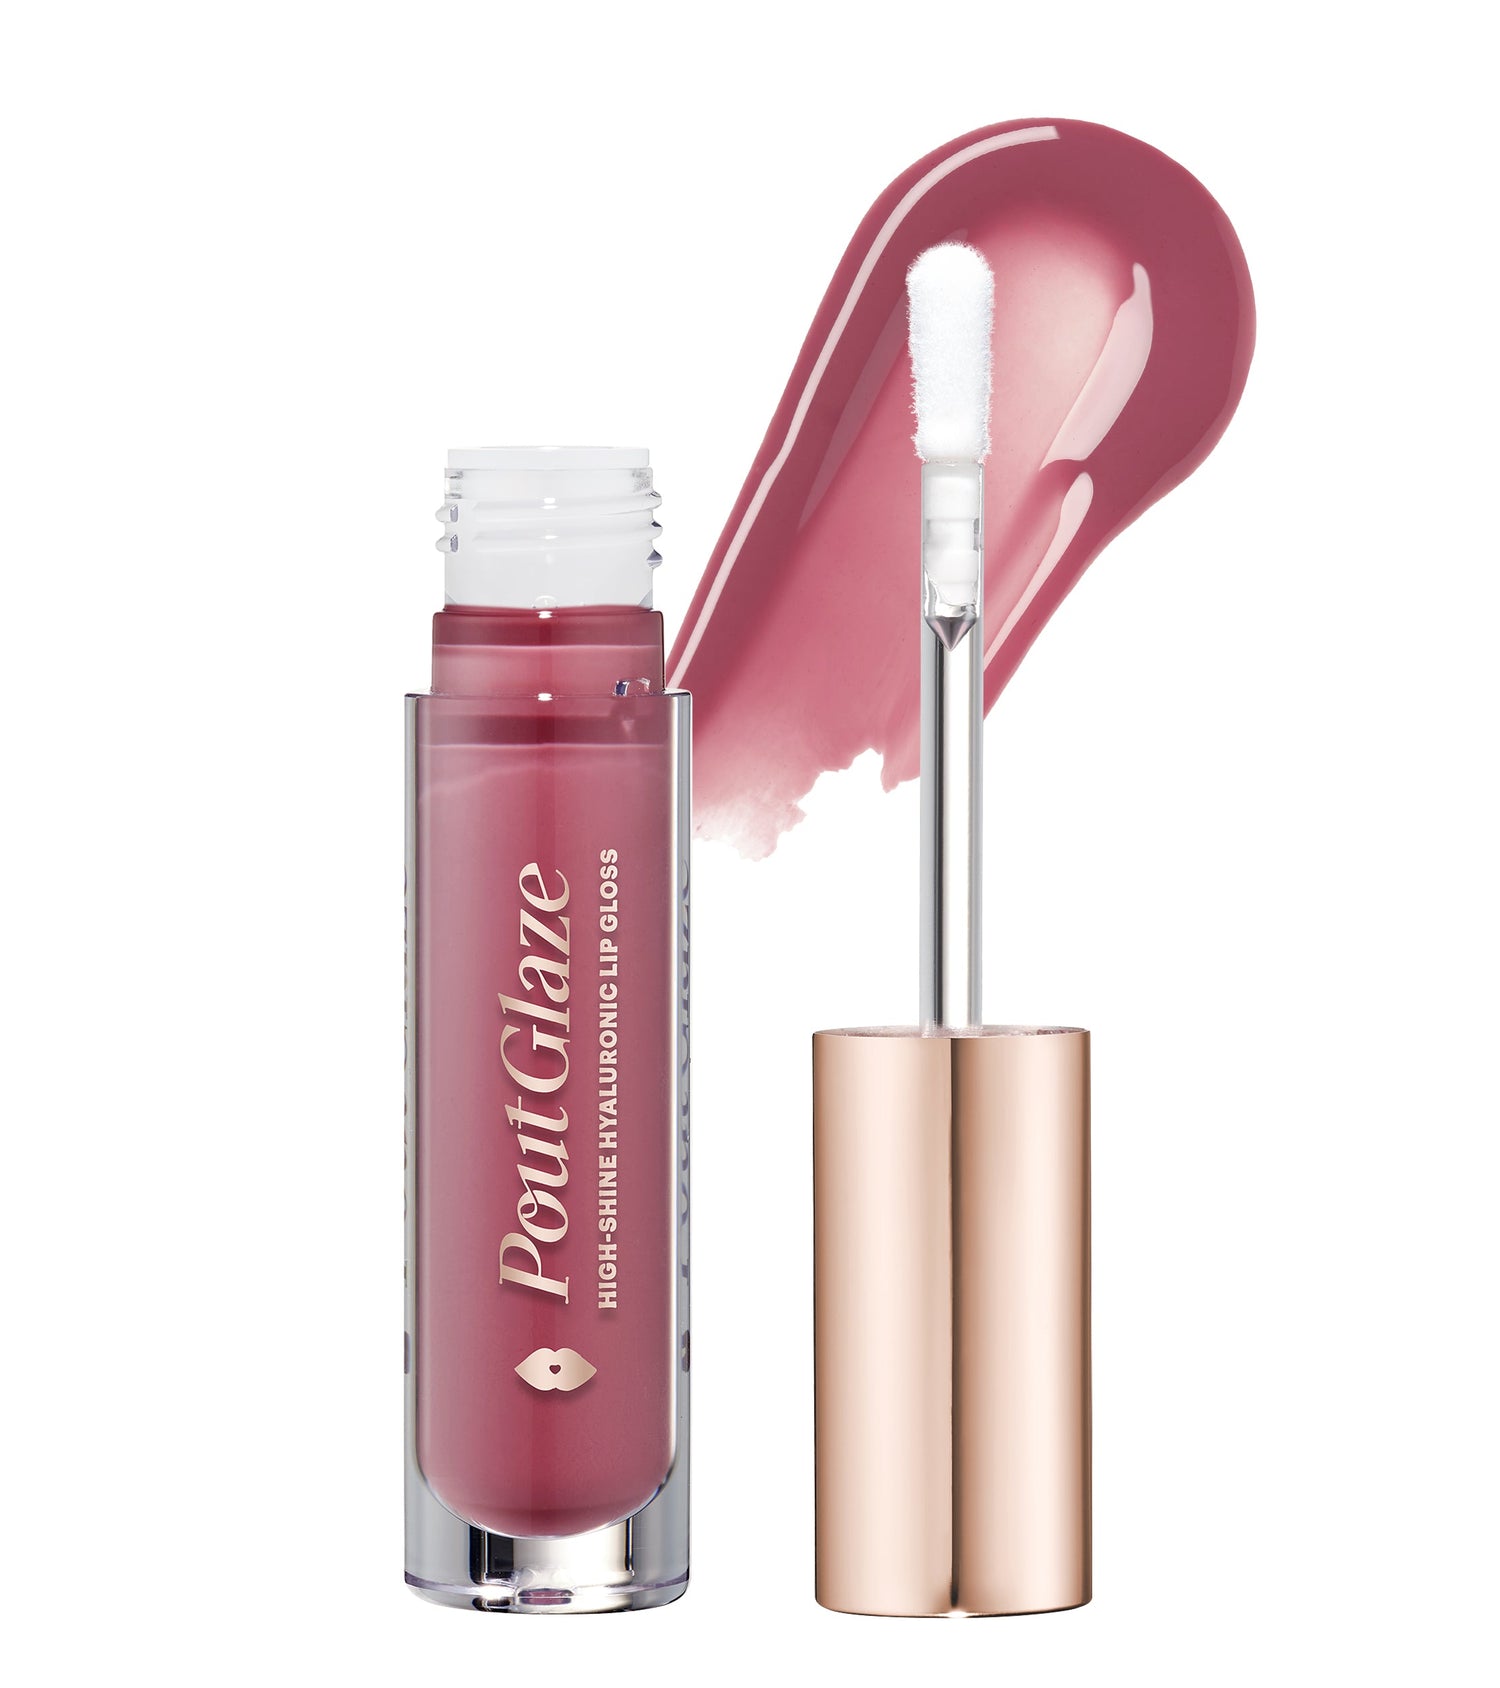 Pout Glaze High-Shine-Hyaluronic Lip Gloss (Stephanie) Main Image featured